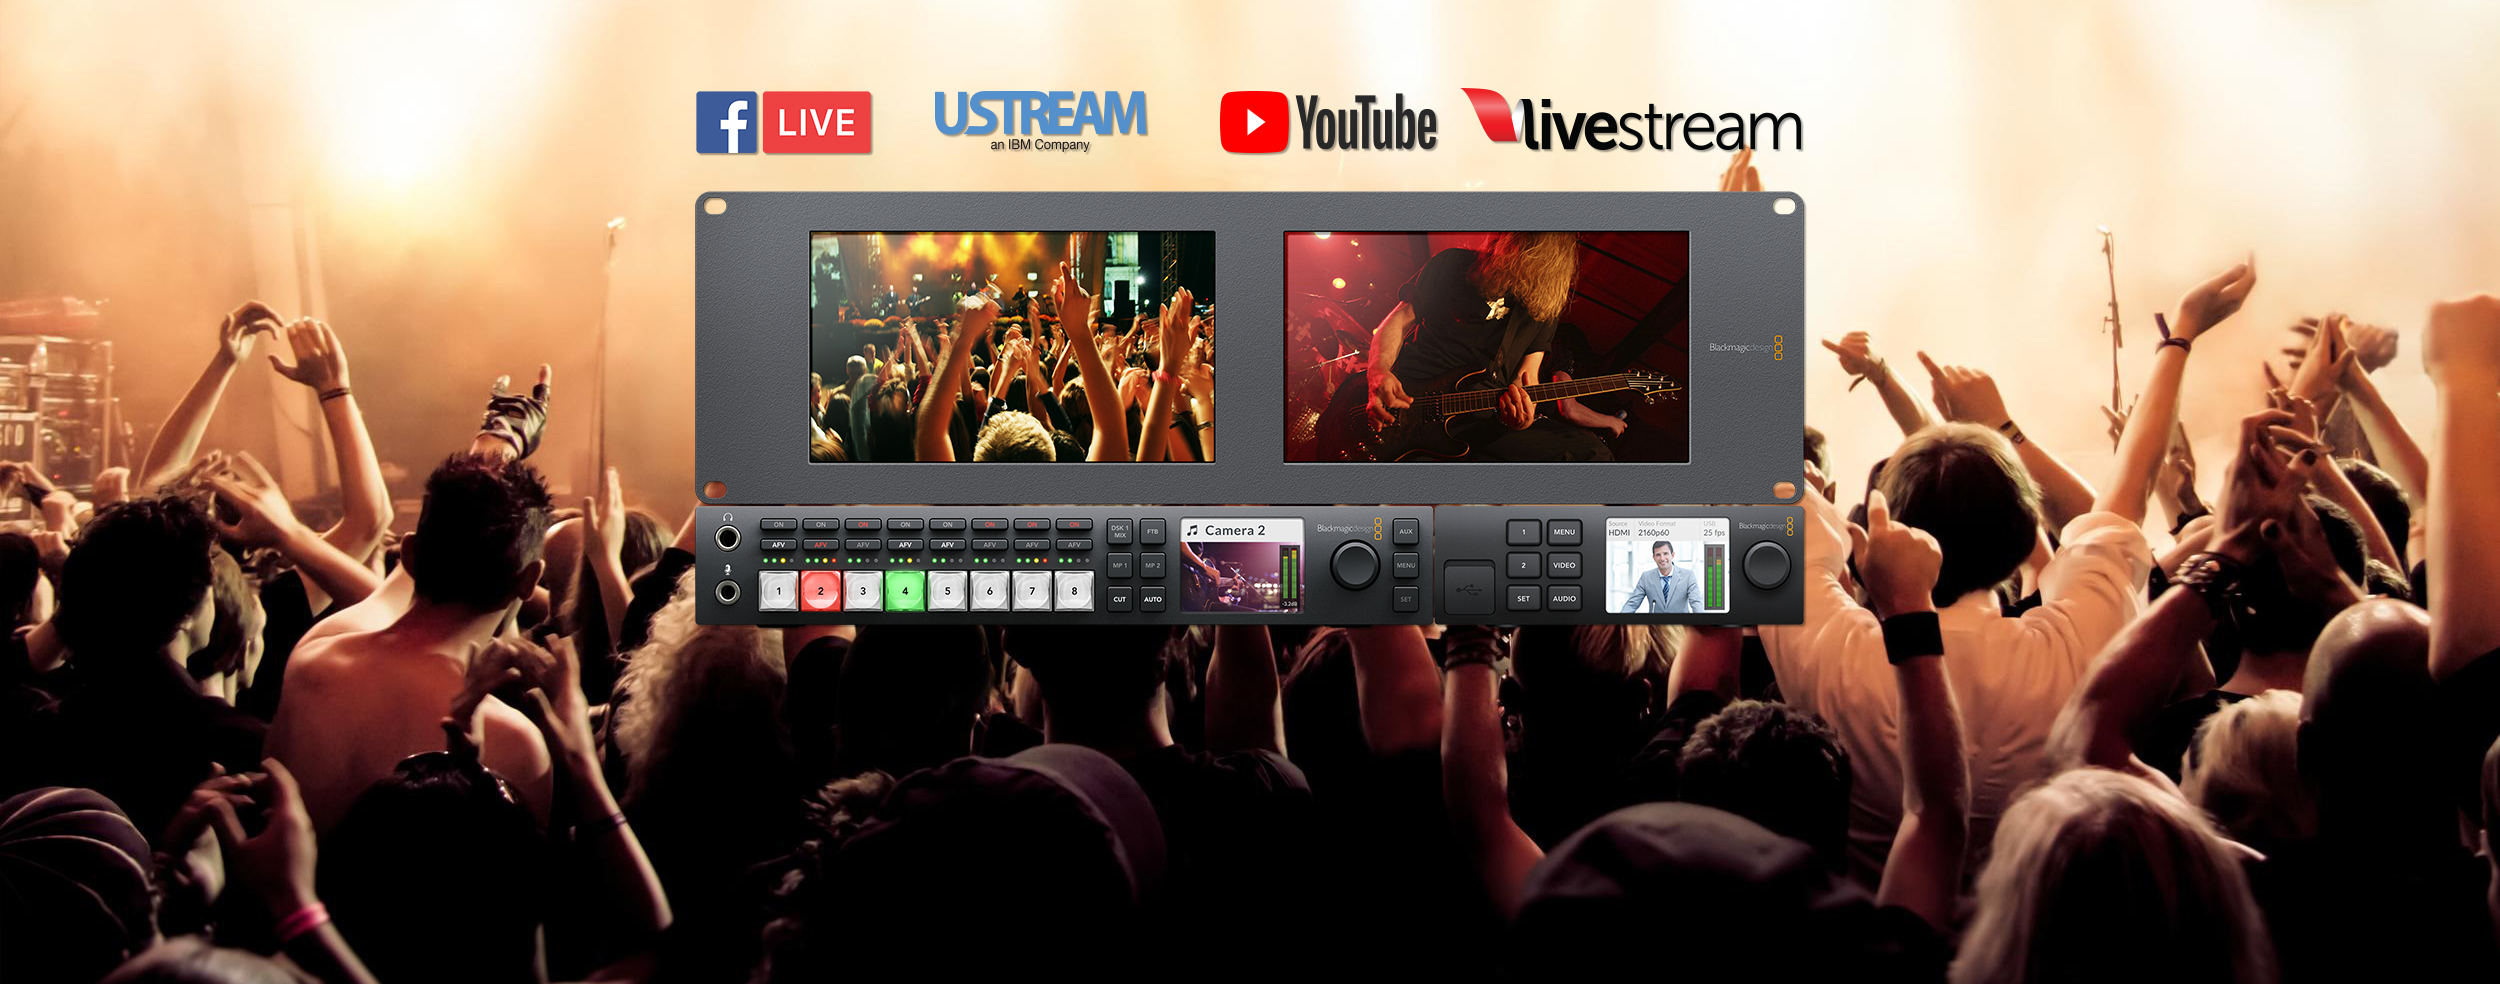 Webcasting (Live Streaming)